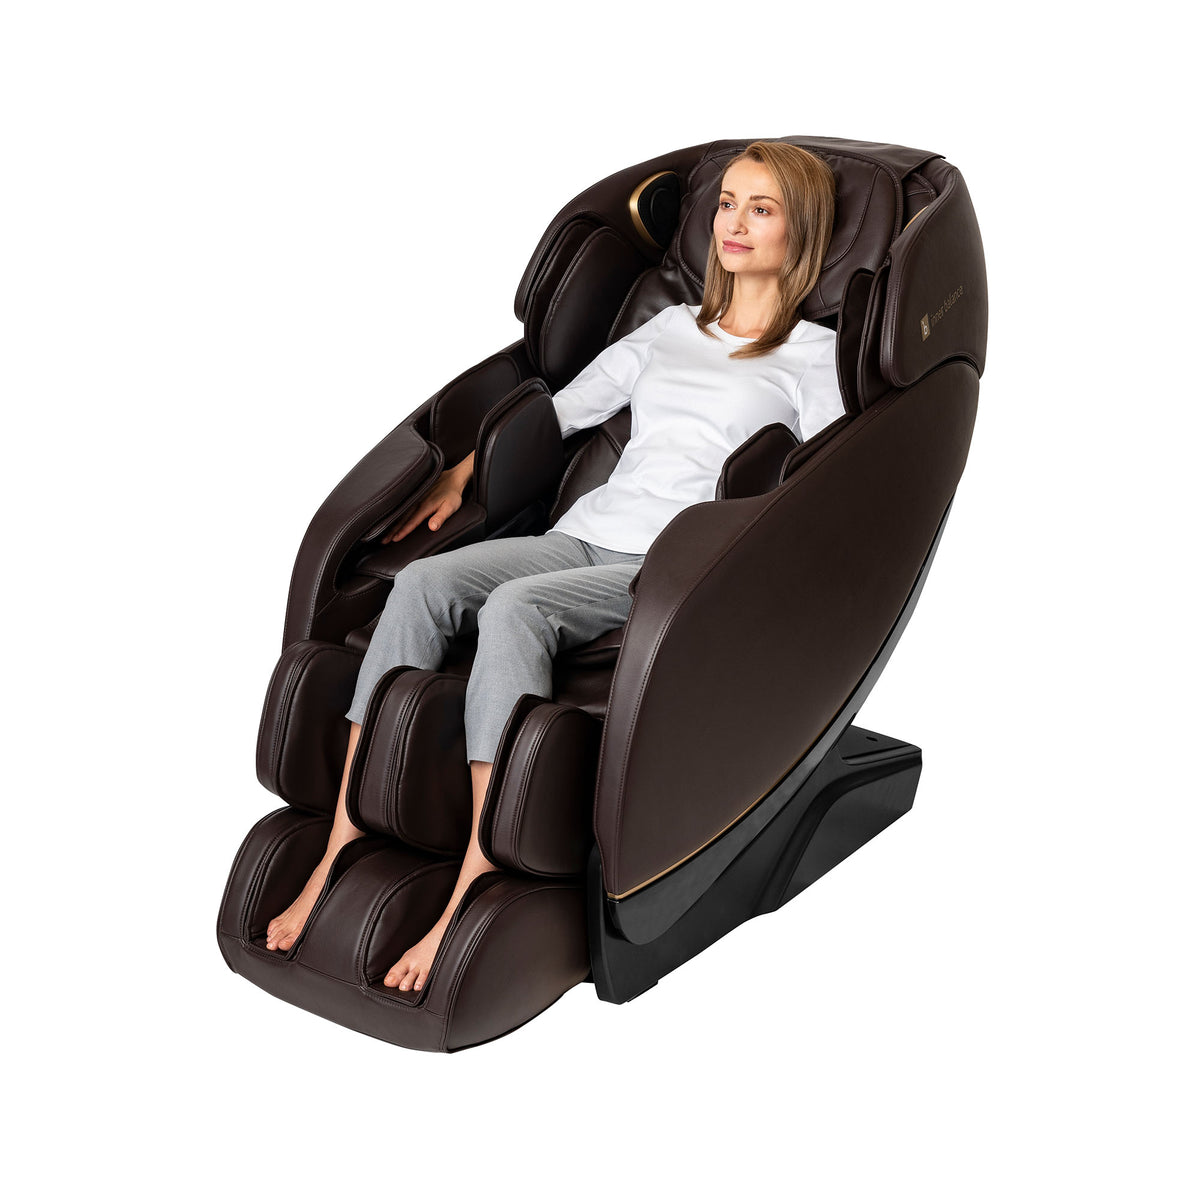 Individual using the brown leather Inner Balance Wellness Jin 2.0 Massage Chair for relaxation